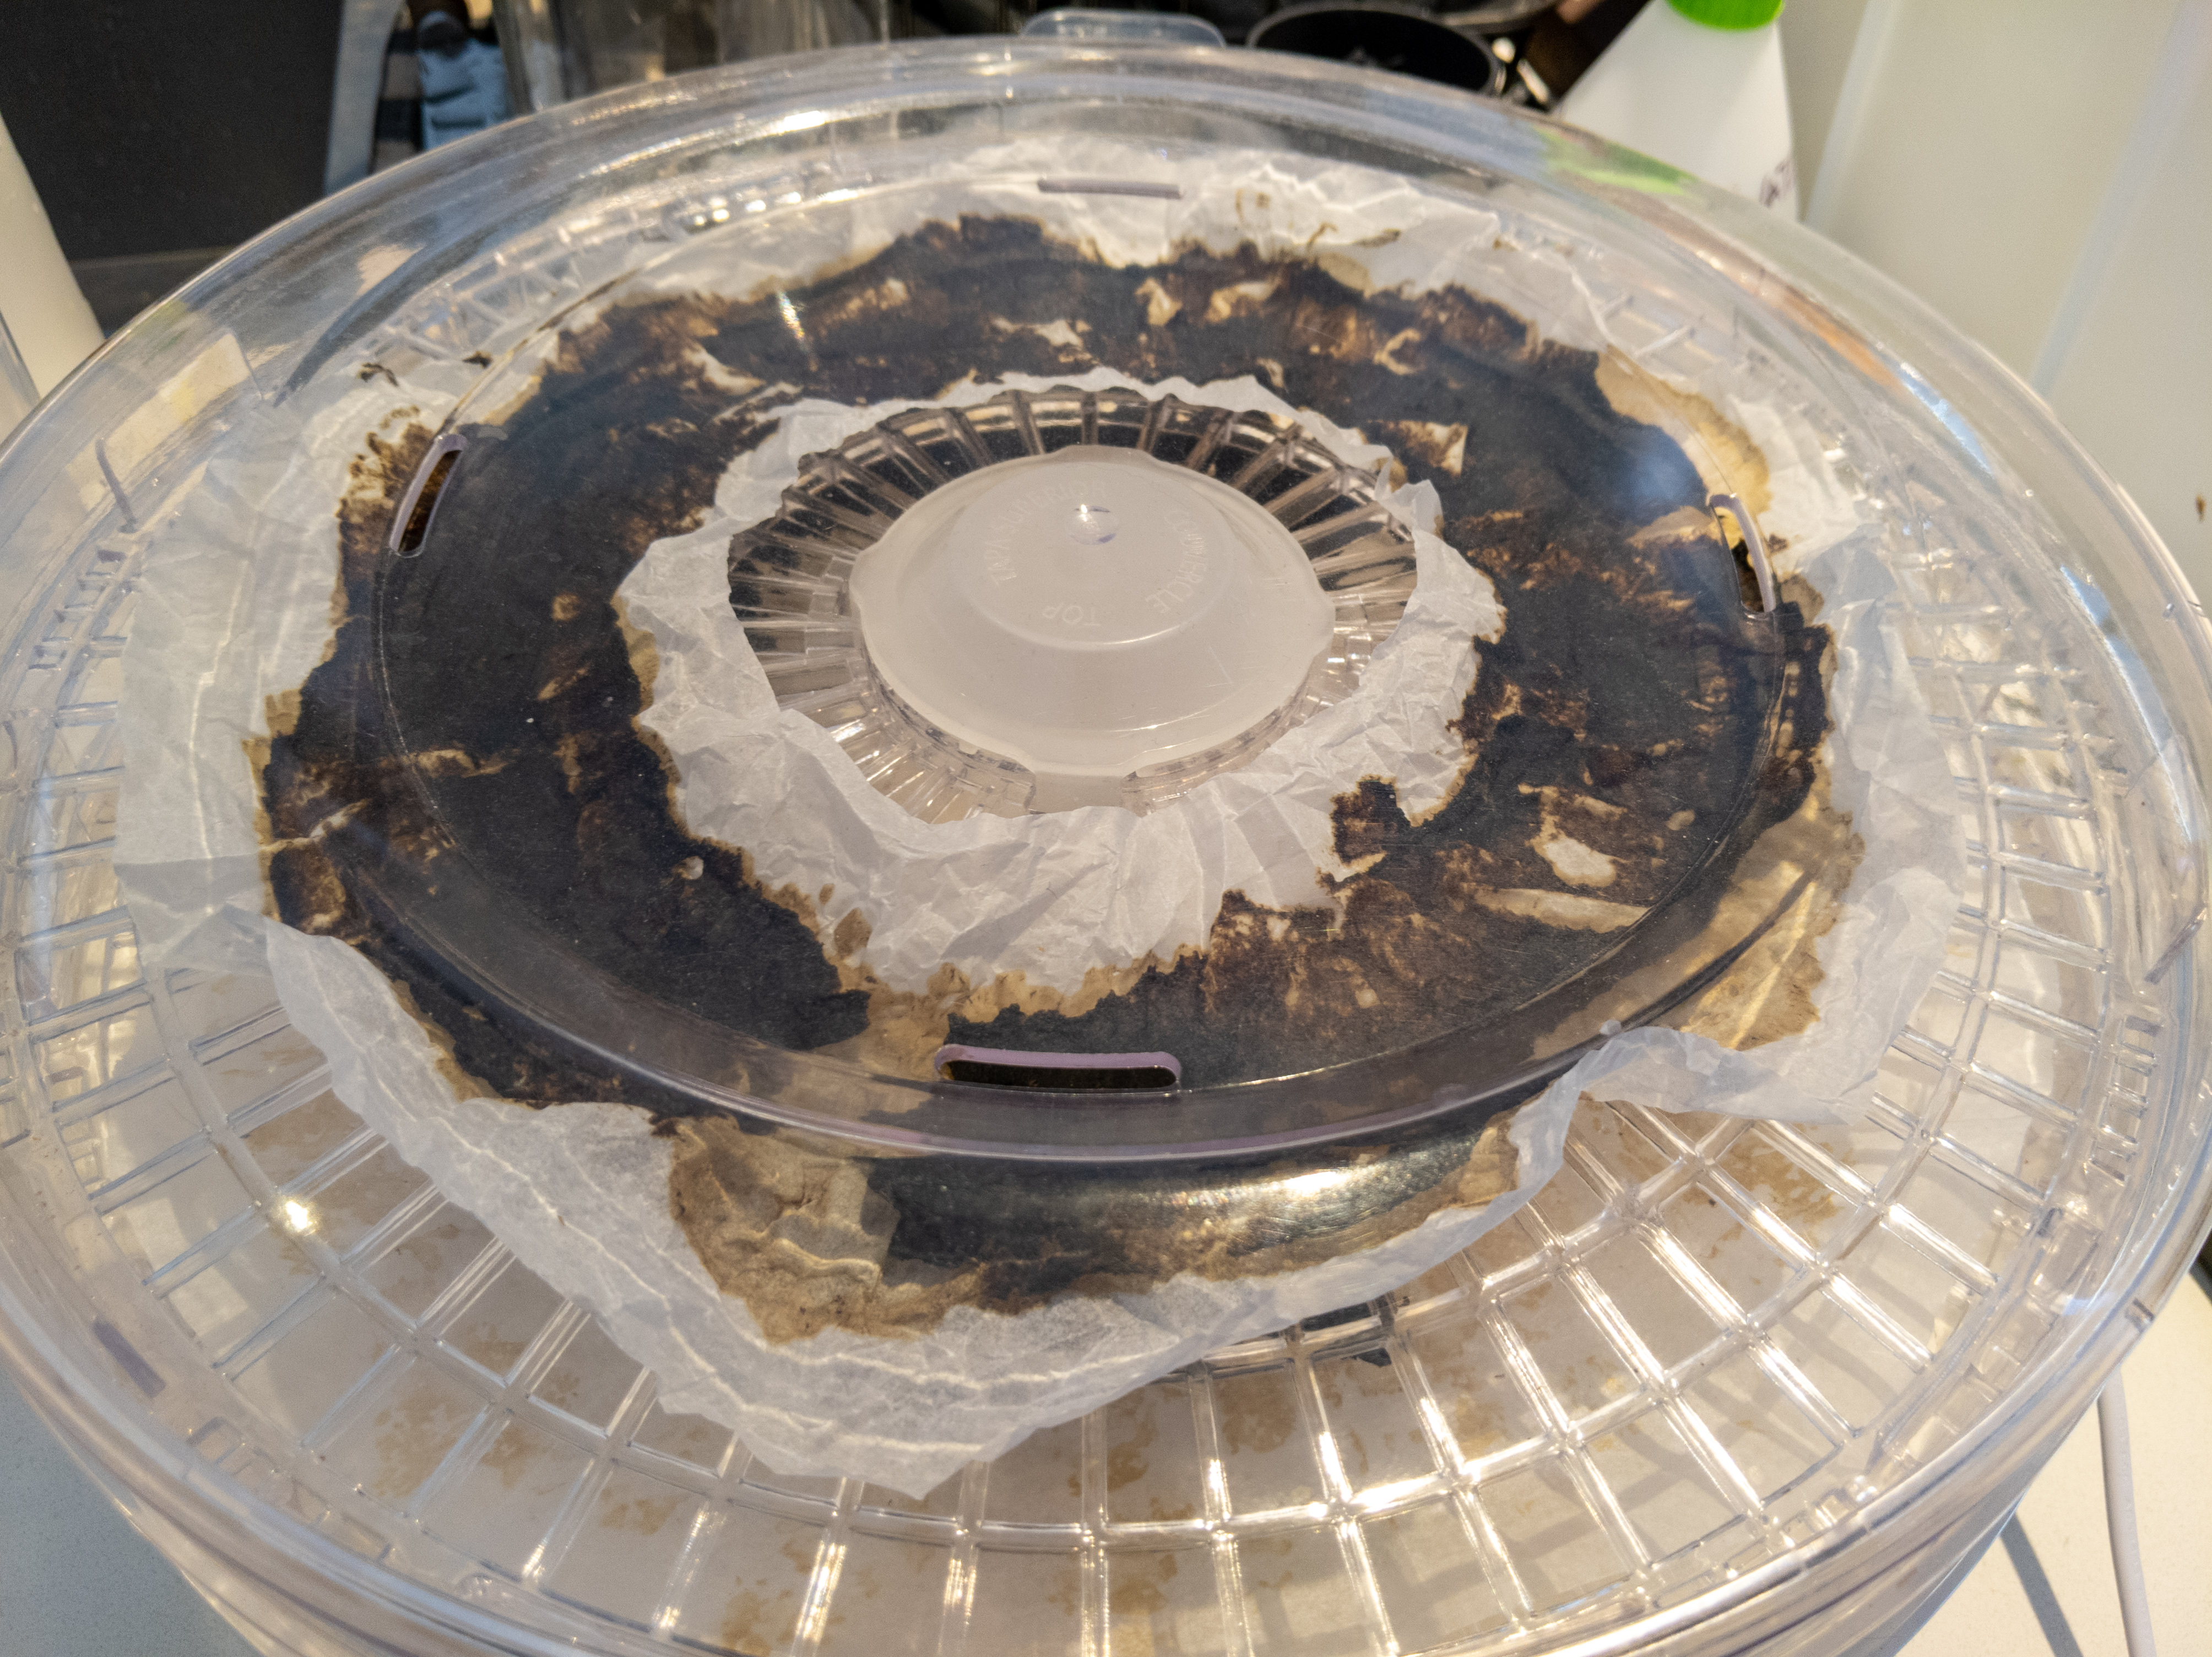 A picture of a circular food dehydrator. Inside the clear lid is a piece of baking paper that has a brown paste smeared on it